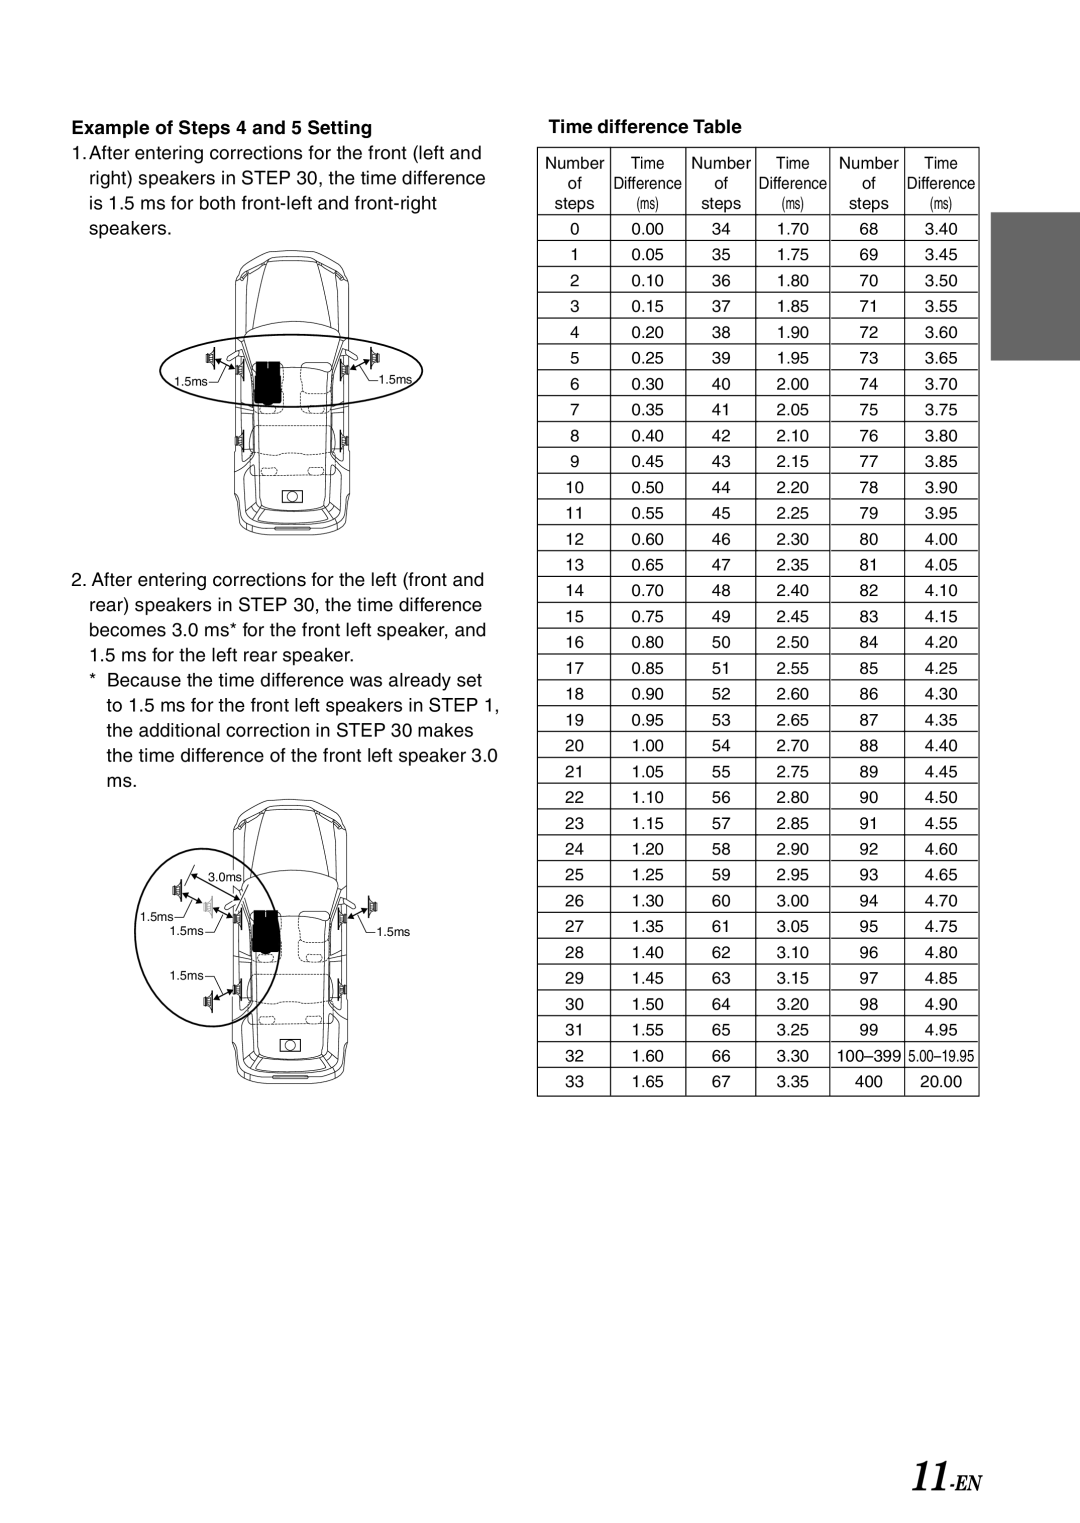 Alpine PXA-H701 owner manual 11-EN, Example of Steps 4 and 5 Setting, Time difference Table 